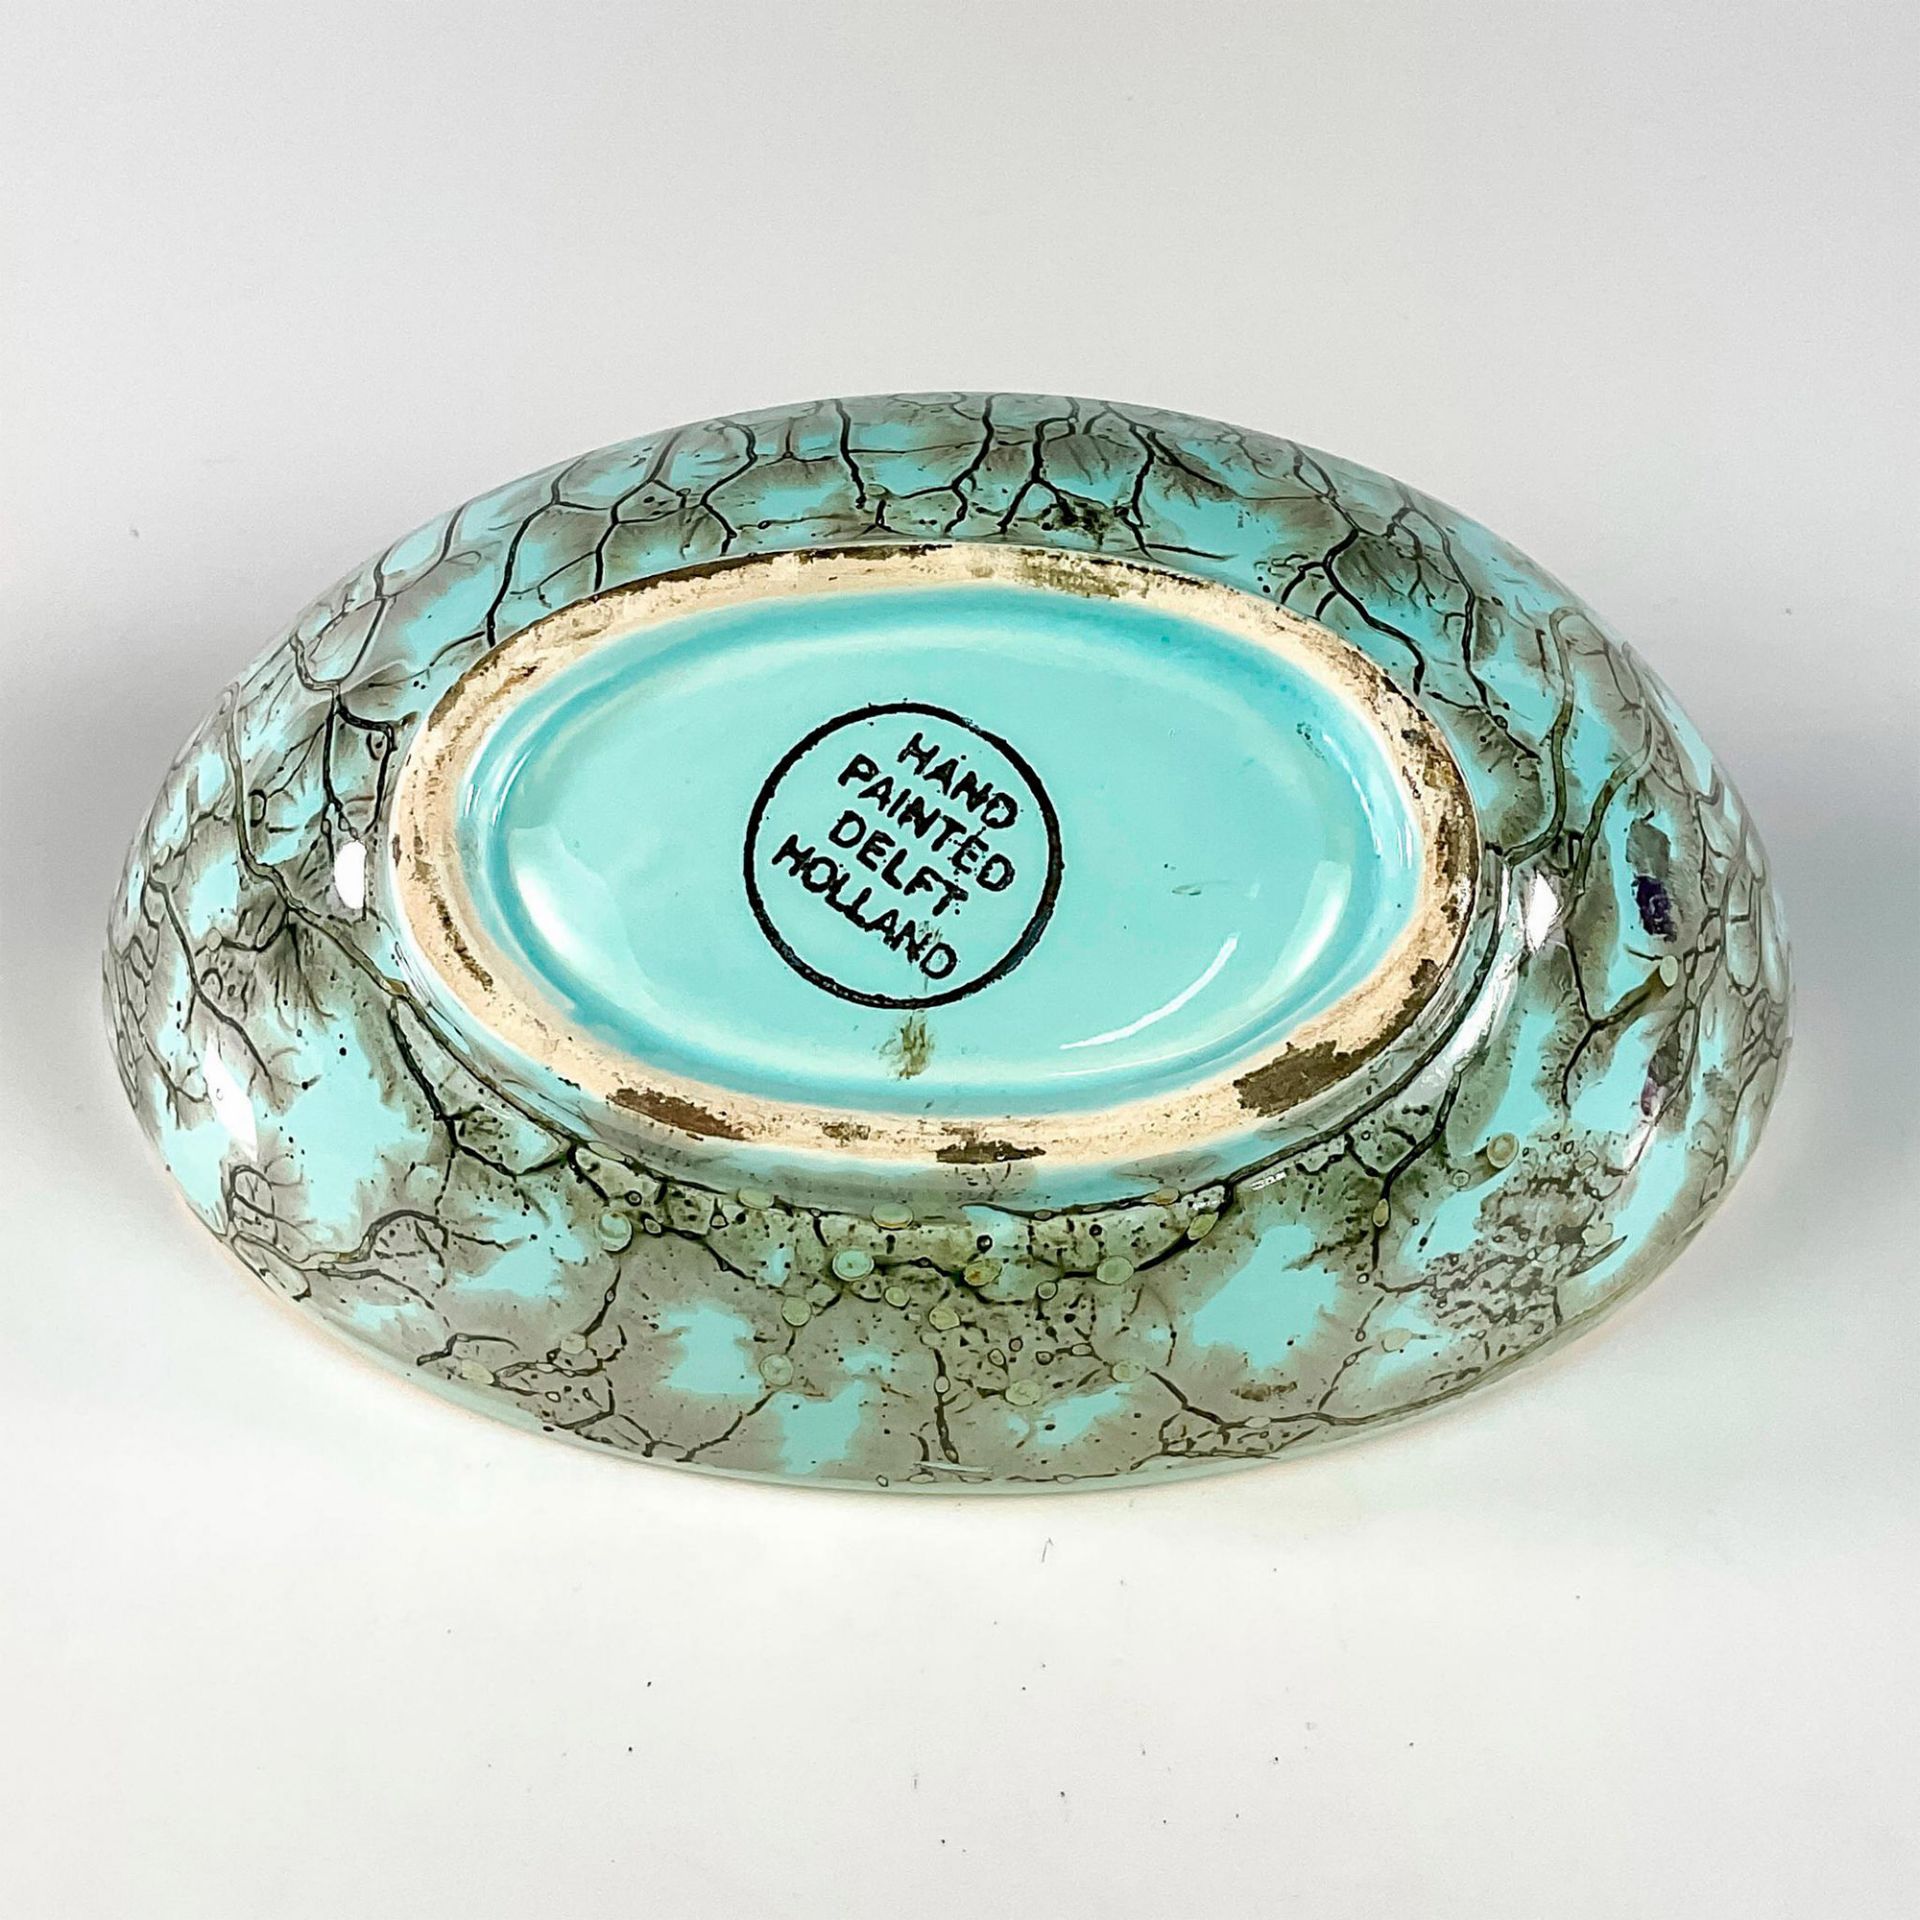 Vintage Hand Painted Delft Blue Green Oval Candy Dish Bowl - Image 4 of 4